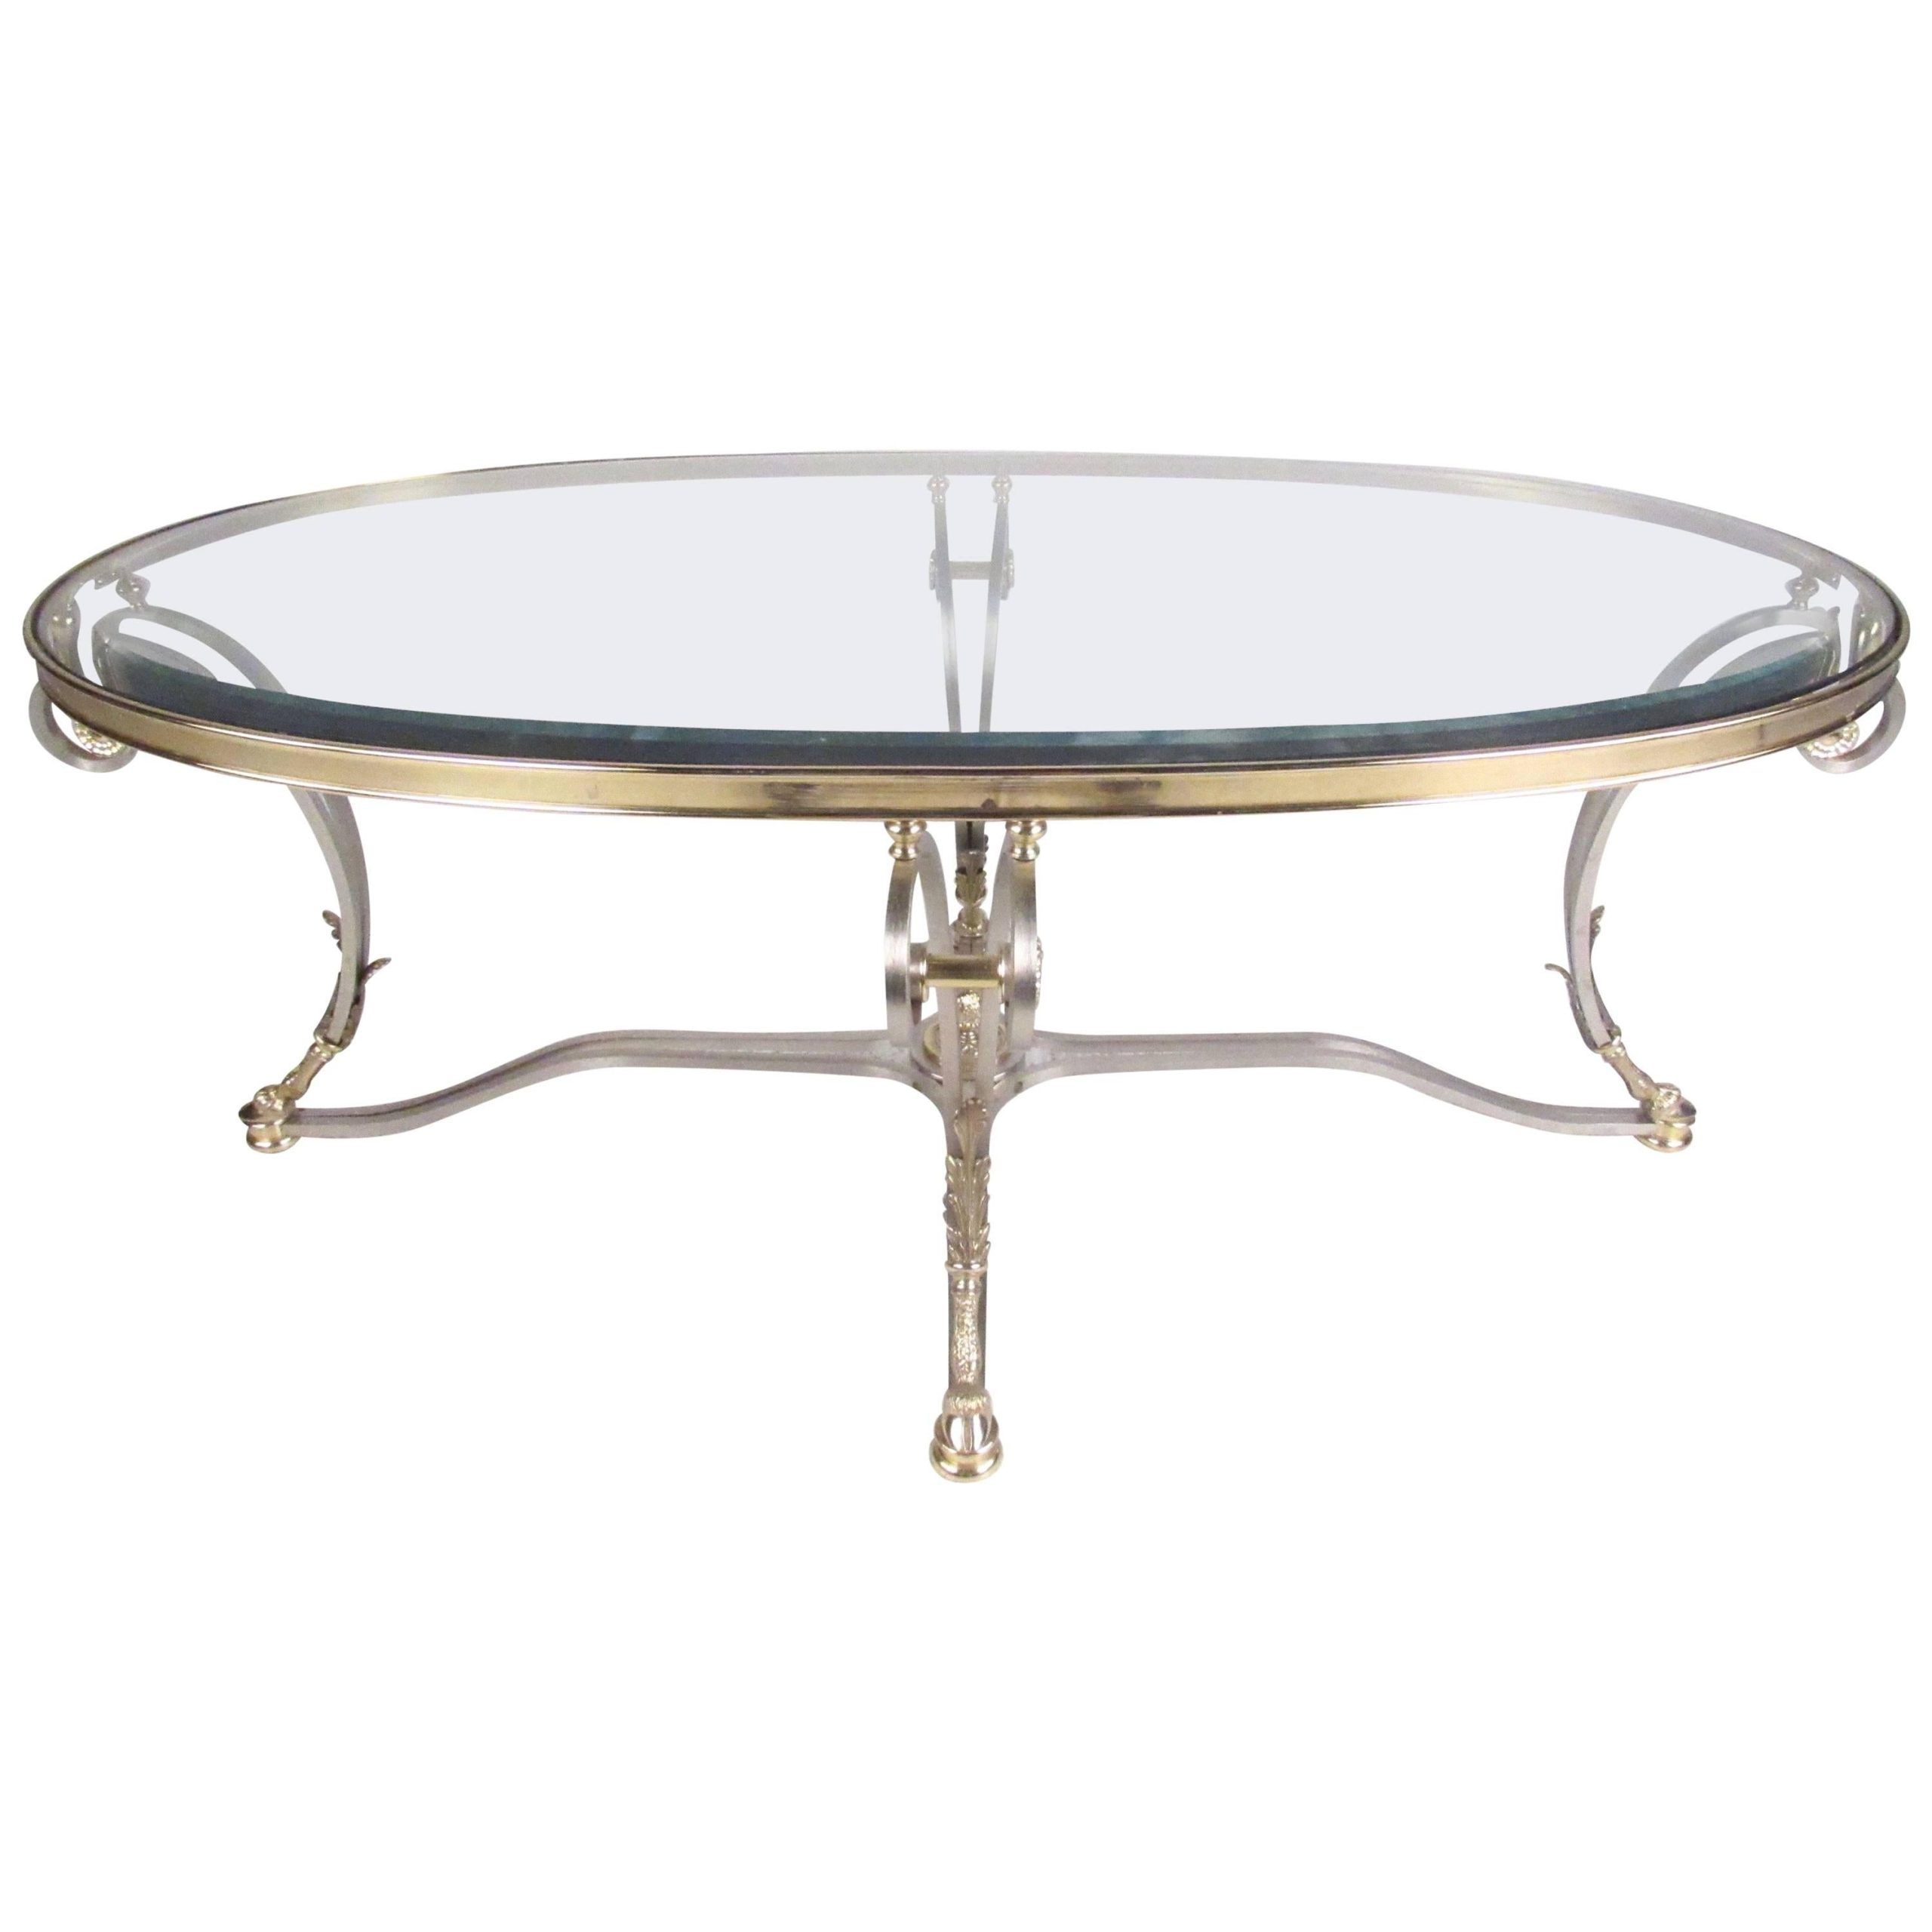 Italian Modern Brass And Steel Regency Style Coffee Table For Sale At Intended For Regency Cain Steel Coffee Tables (View 13 of 15)